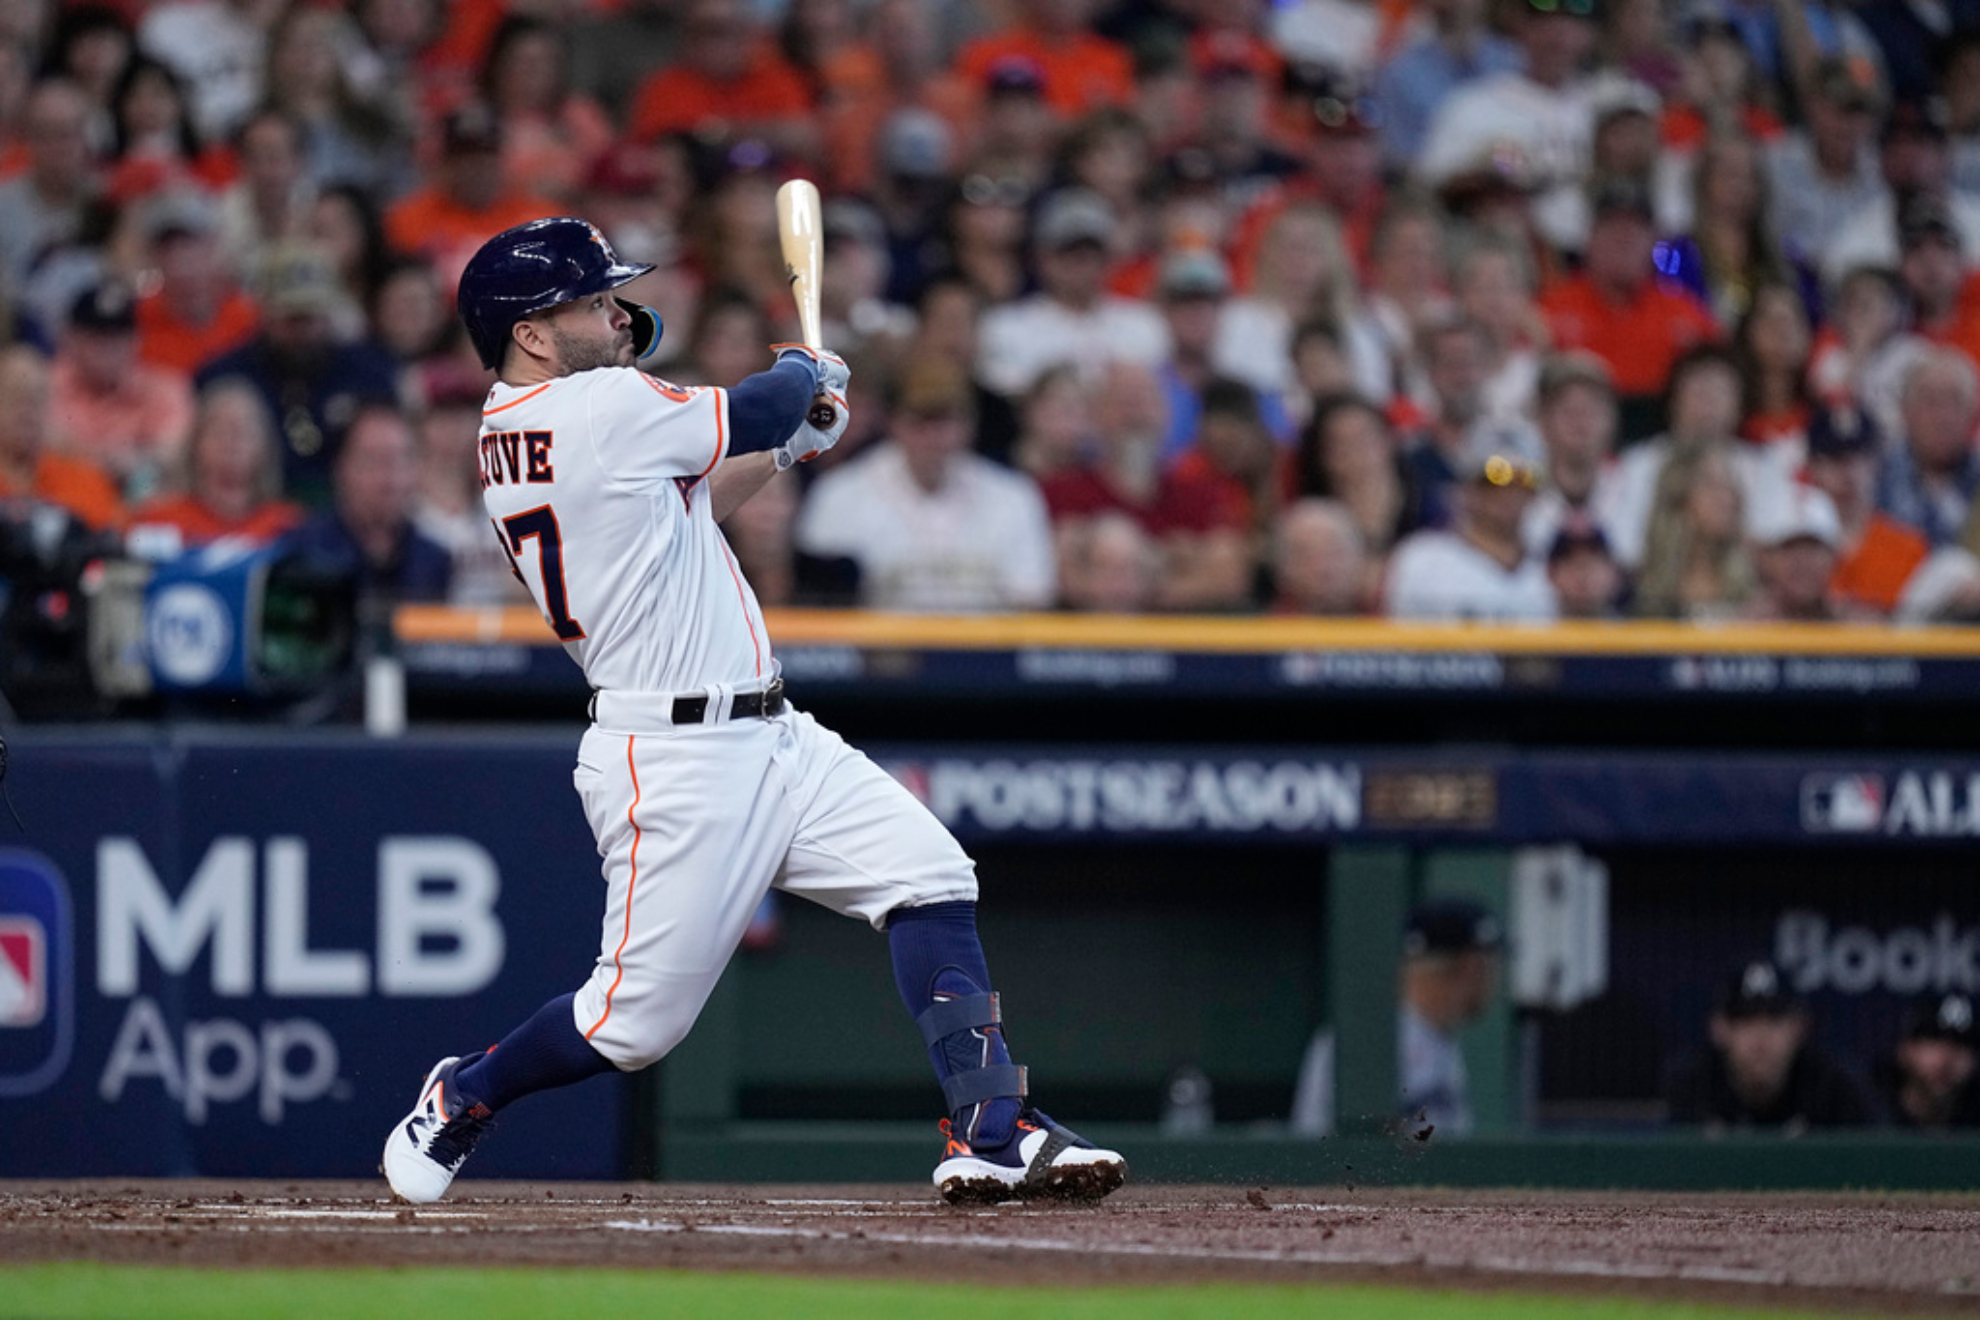 MLB Playoffs: Astros Altuve sets the tone with first-pitch homer in AL Divisional Series vs Twins